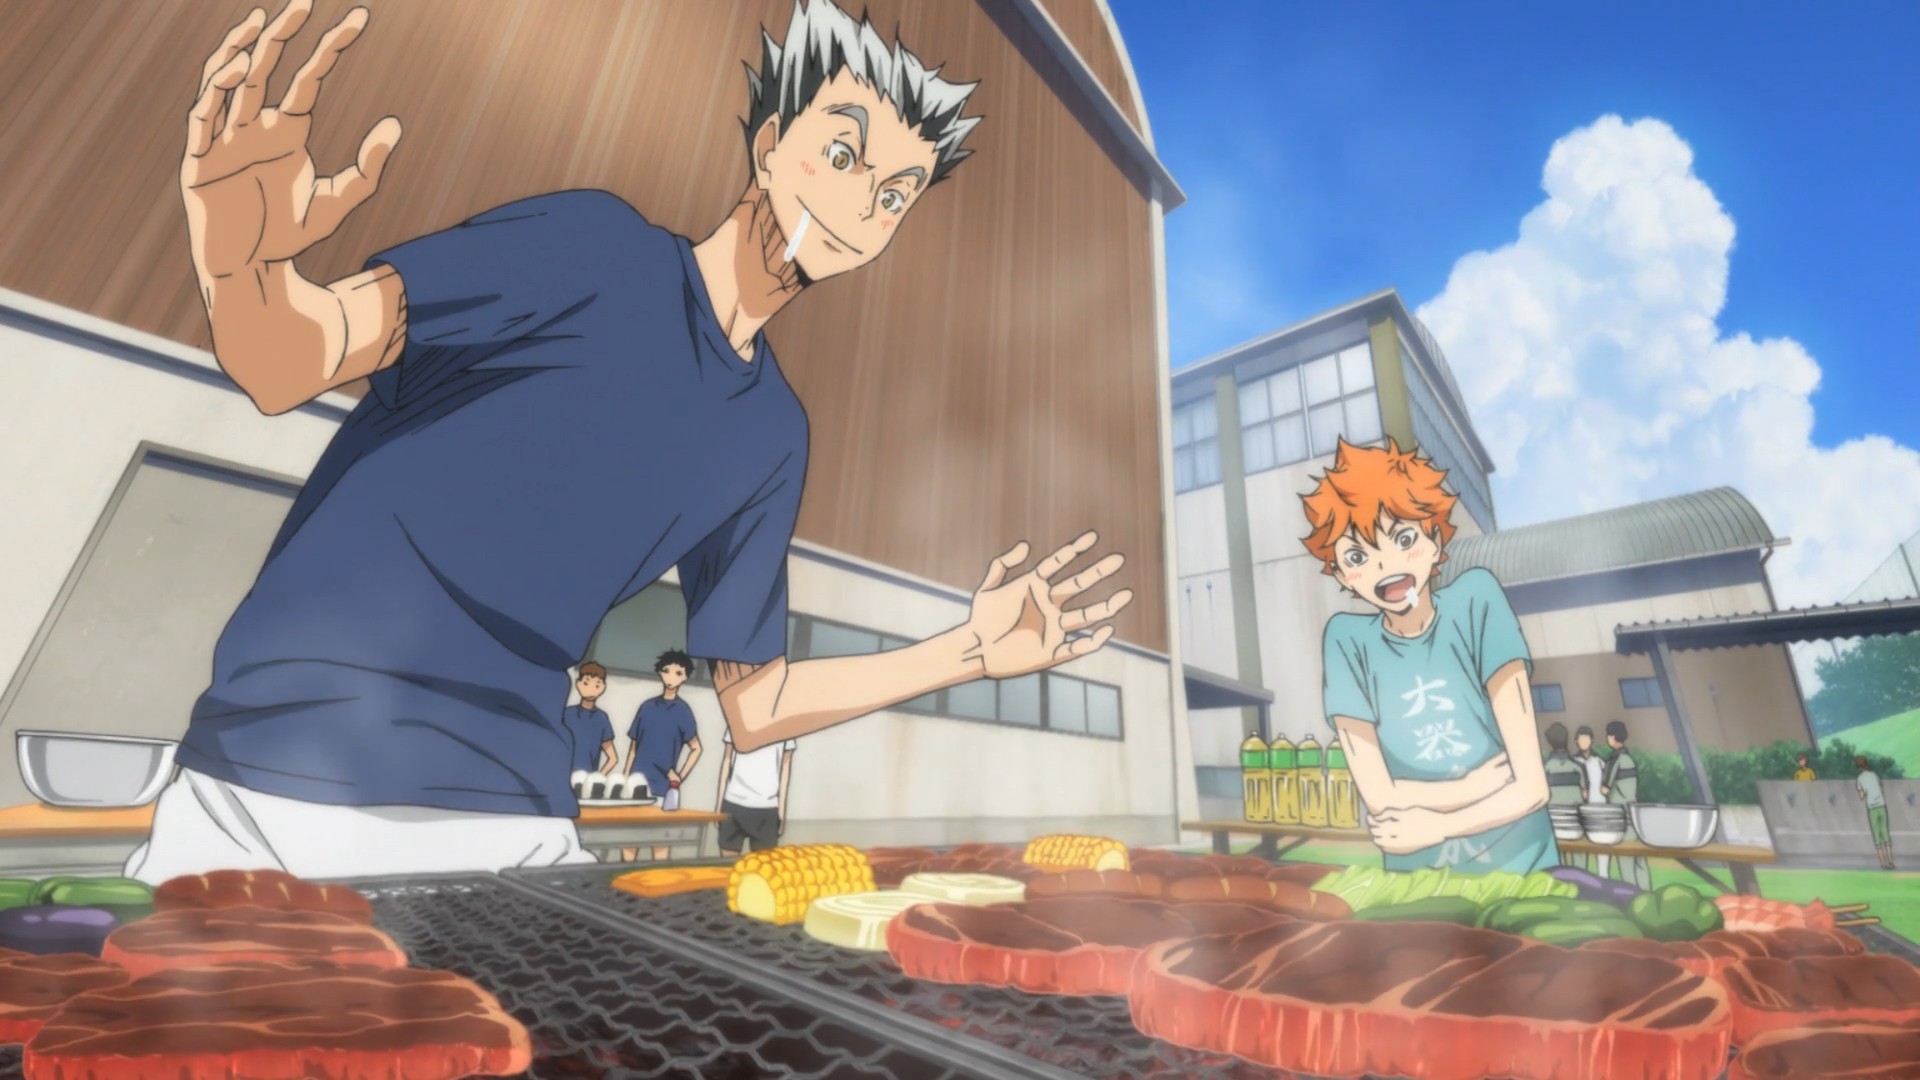 Thanksgiving in anime – giving thanks for meaningful meals